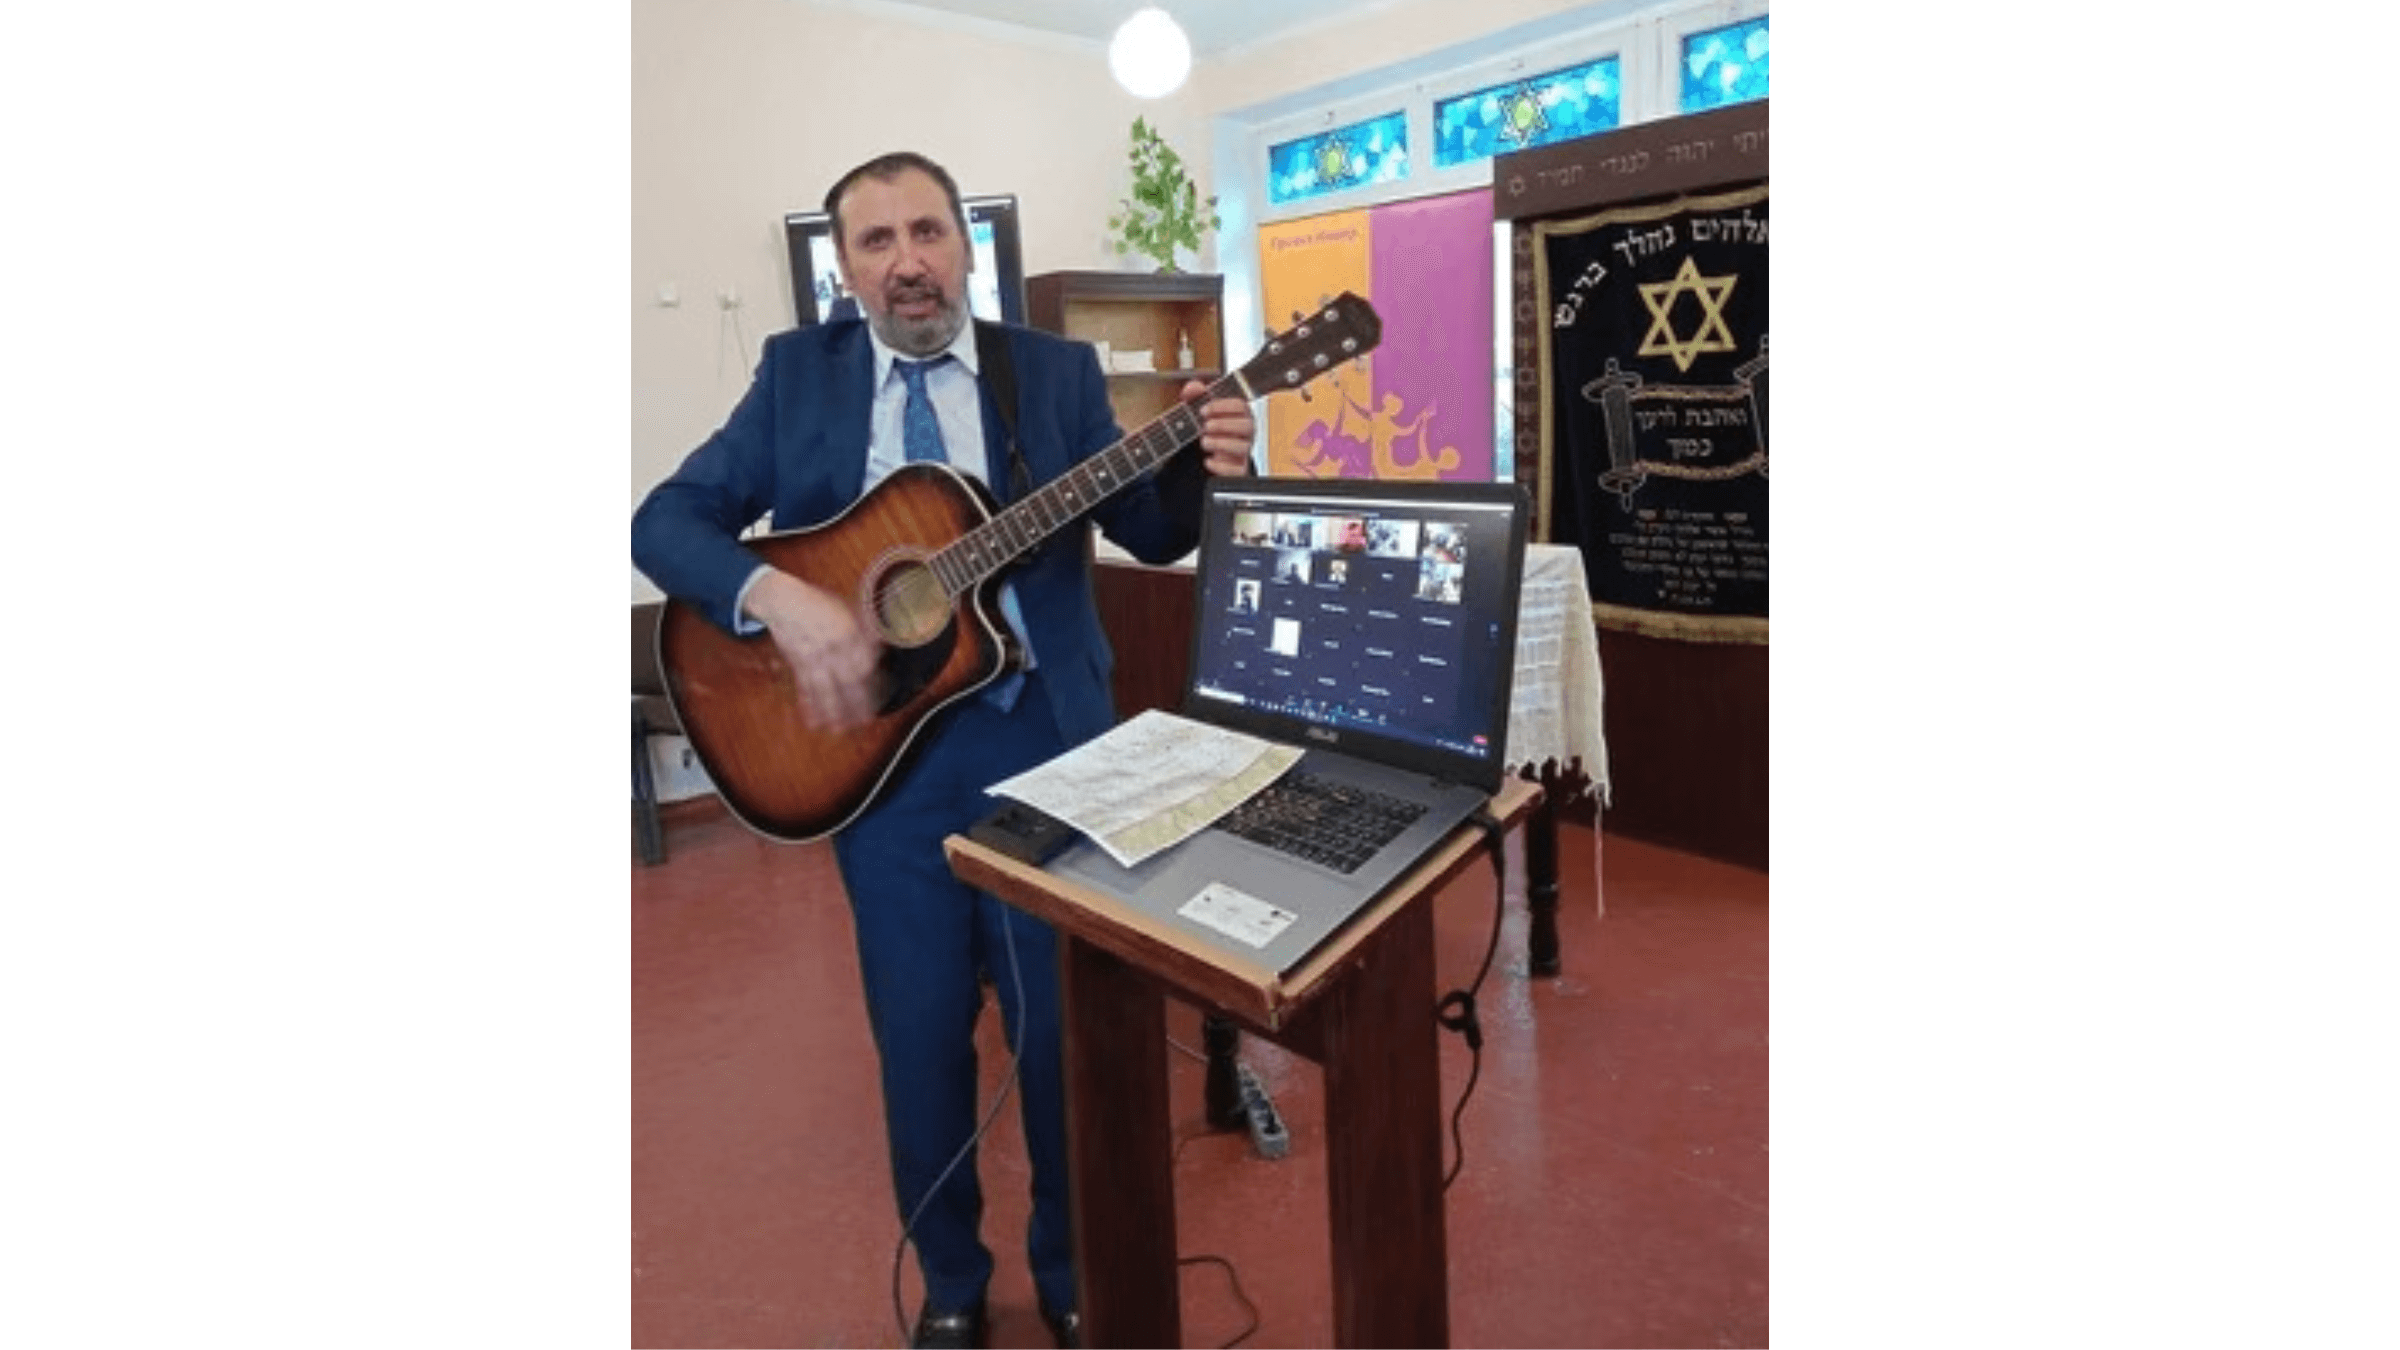 Rabbi Reuven Stamov in Masoret, the synagogue he leads in Kyiv.